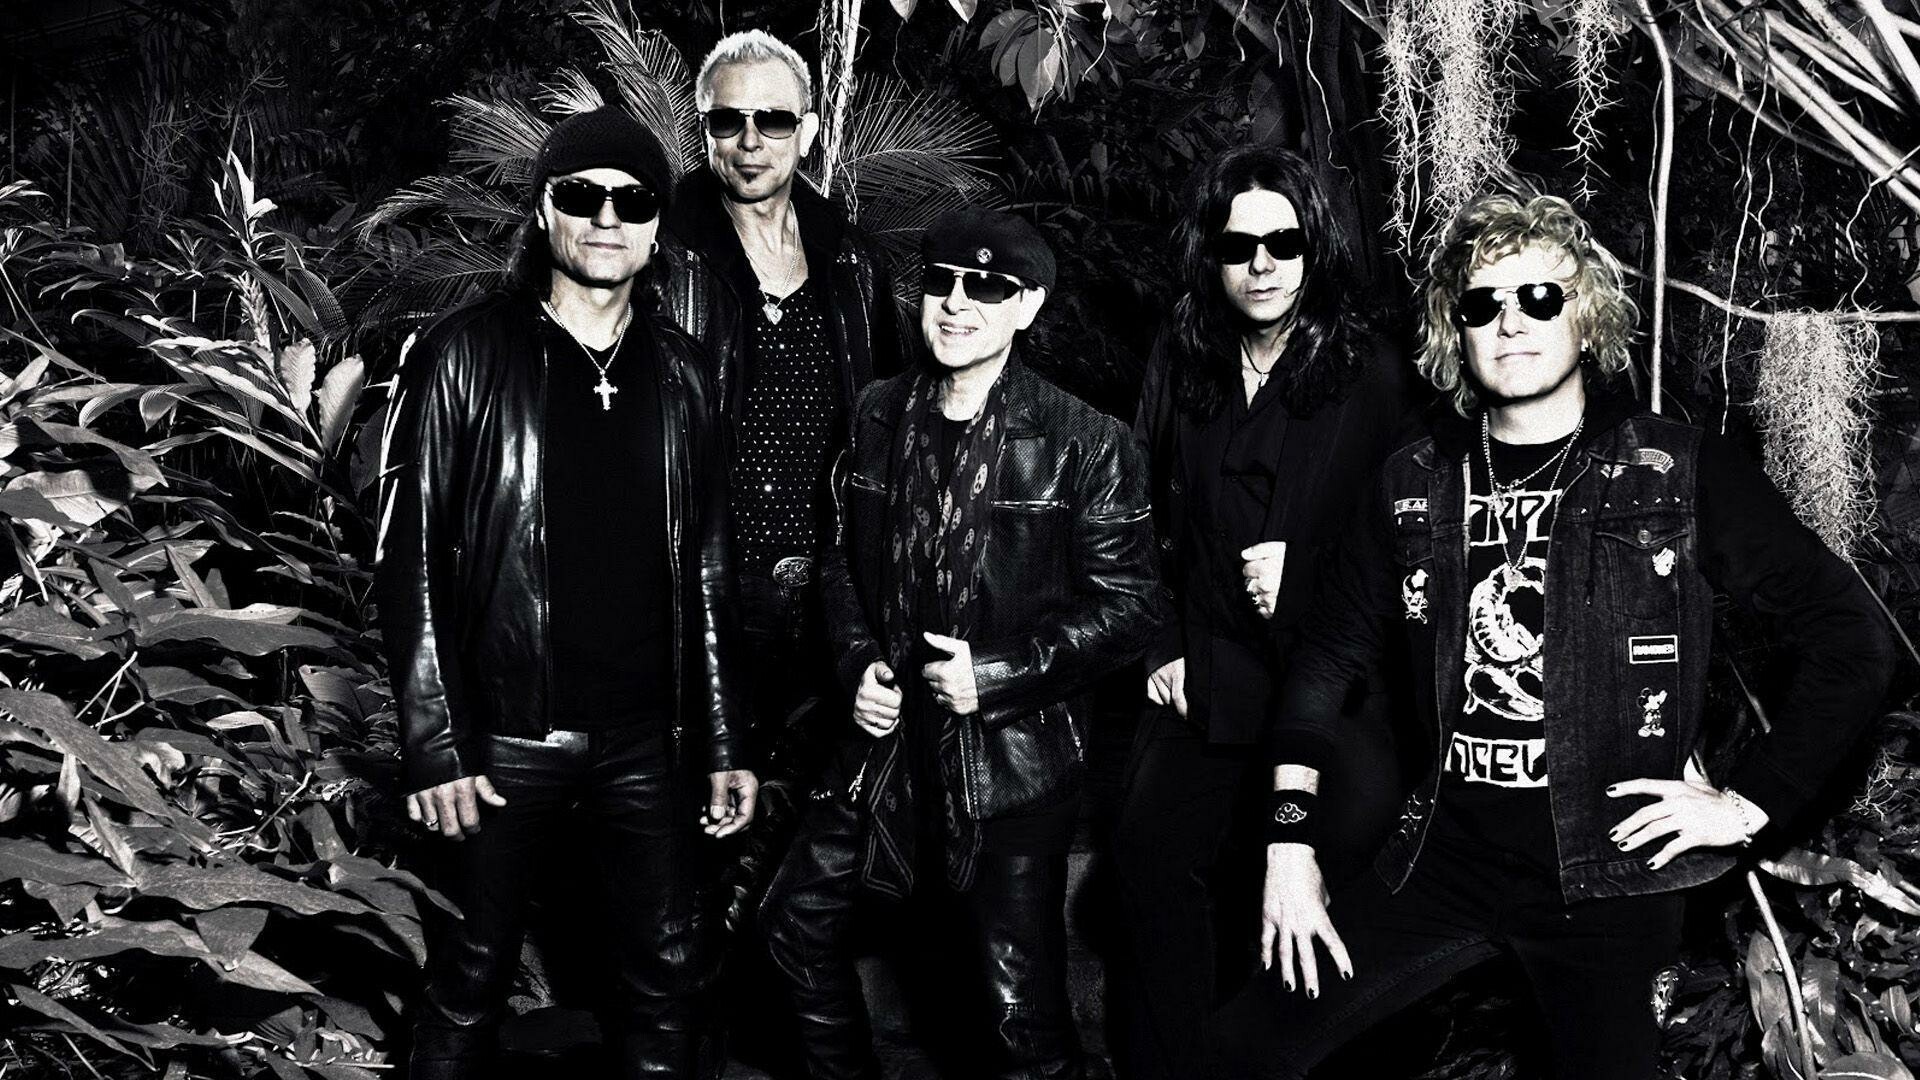 Scorpions: German rockers, One of the most successful rock bands to ever come out of Continental Europe. 1920x1080 Full HD Background.